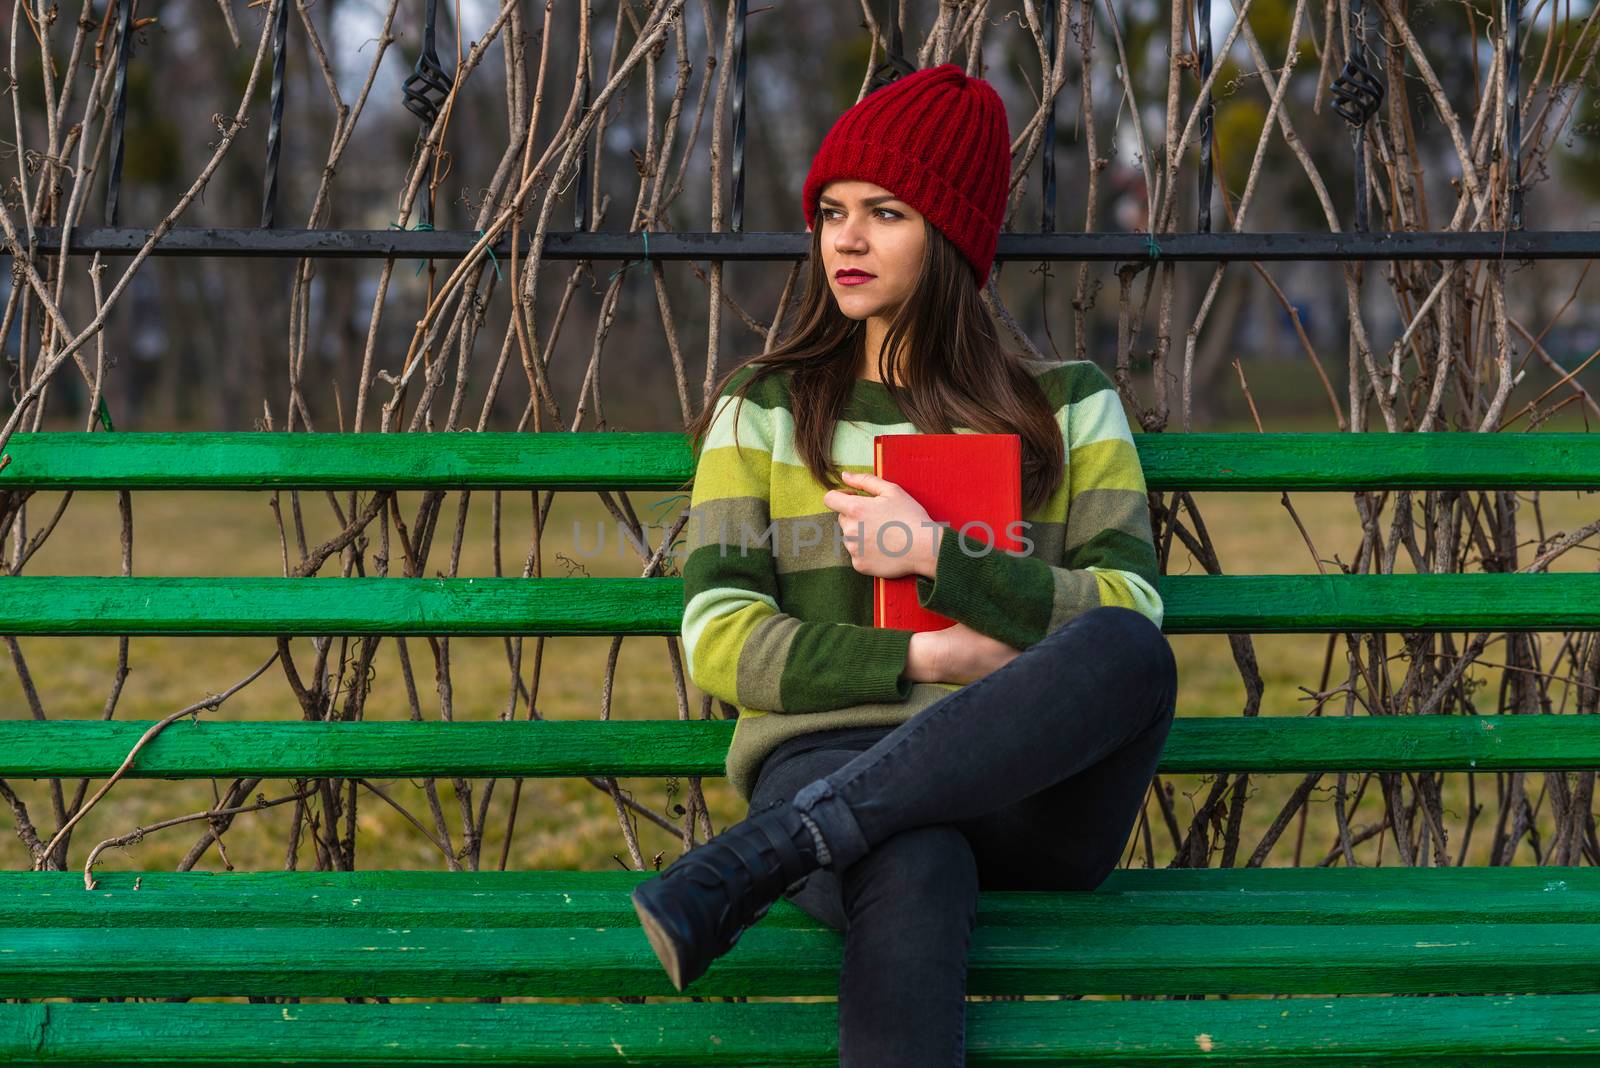 Teenager girl in red hat and green sweater sitting on a bench in a park and holding a red book. Medium shot.